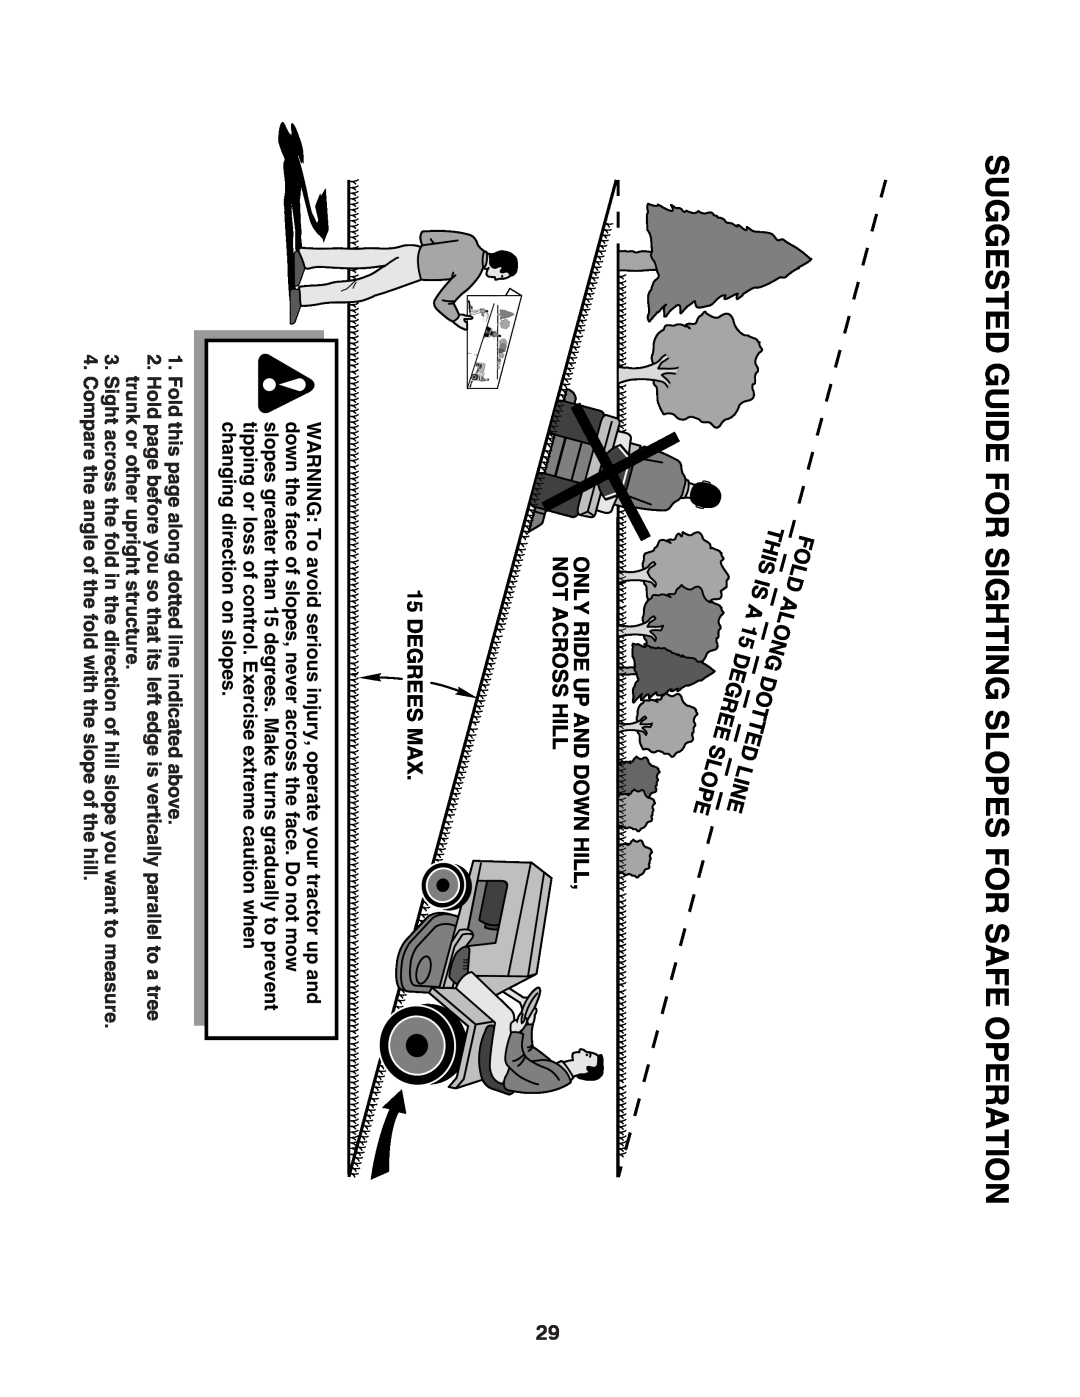 Poulan 425001 manual Suggested Guide For Sighting Slopes For Safe Operation, Fold, Along, This, Dotted, Line, Degree 